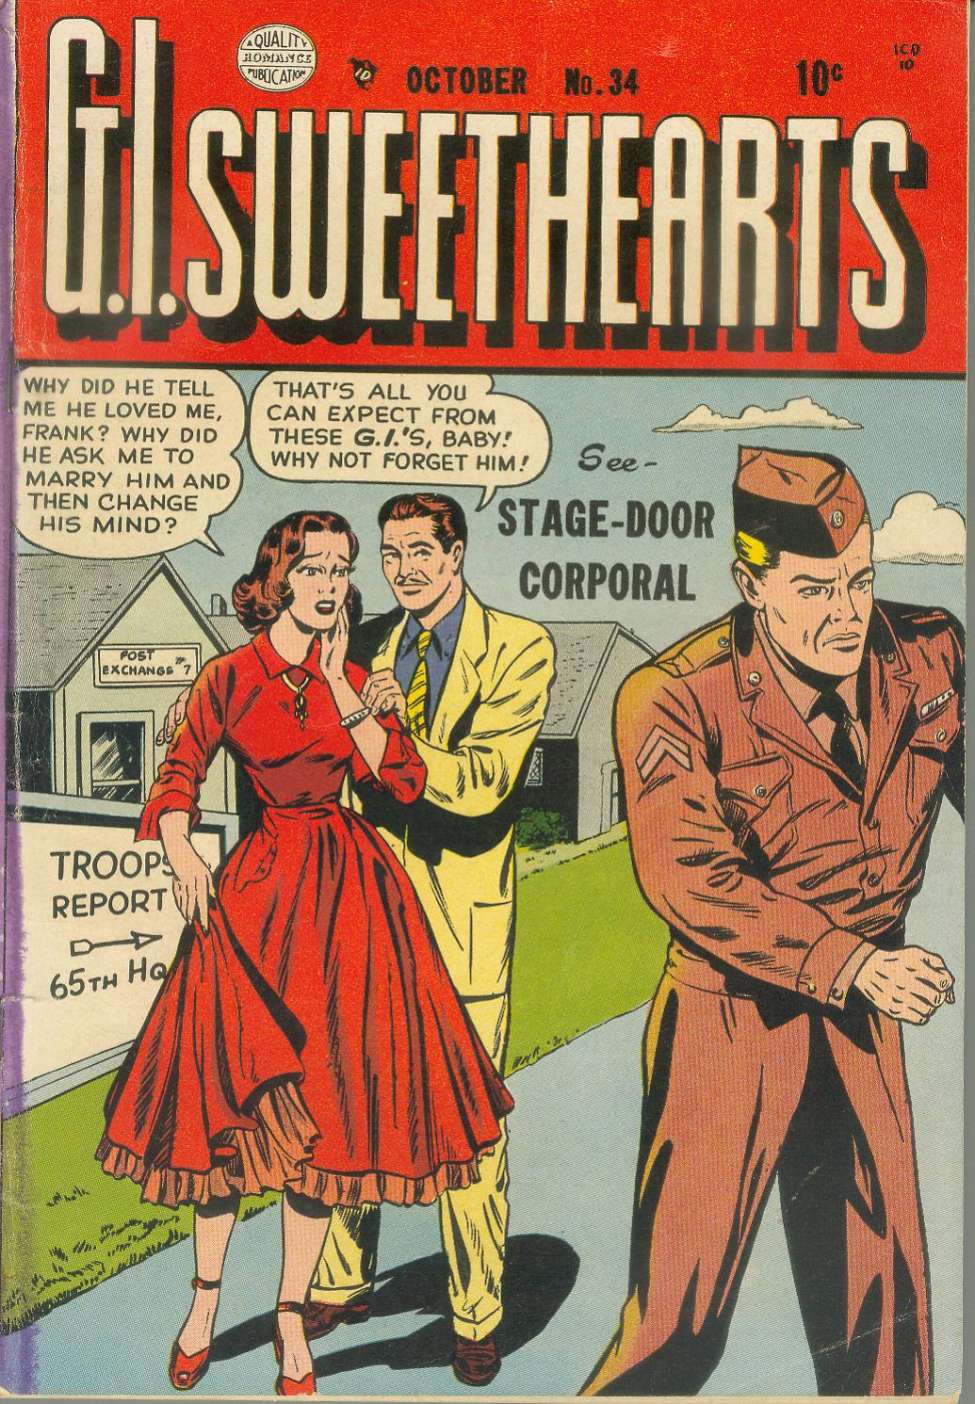 Comic Book Cover For G.I. Sweethearts 34